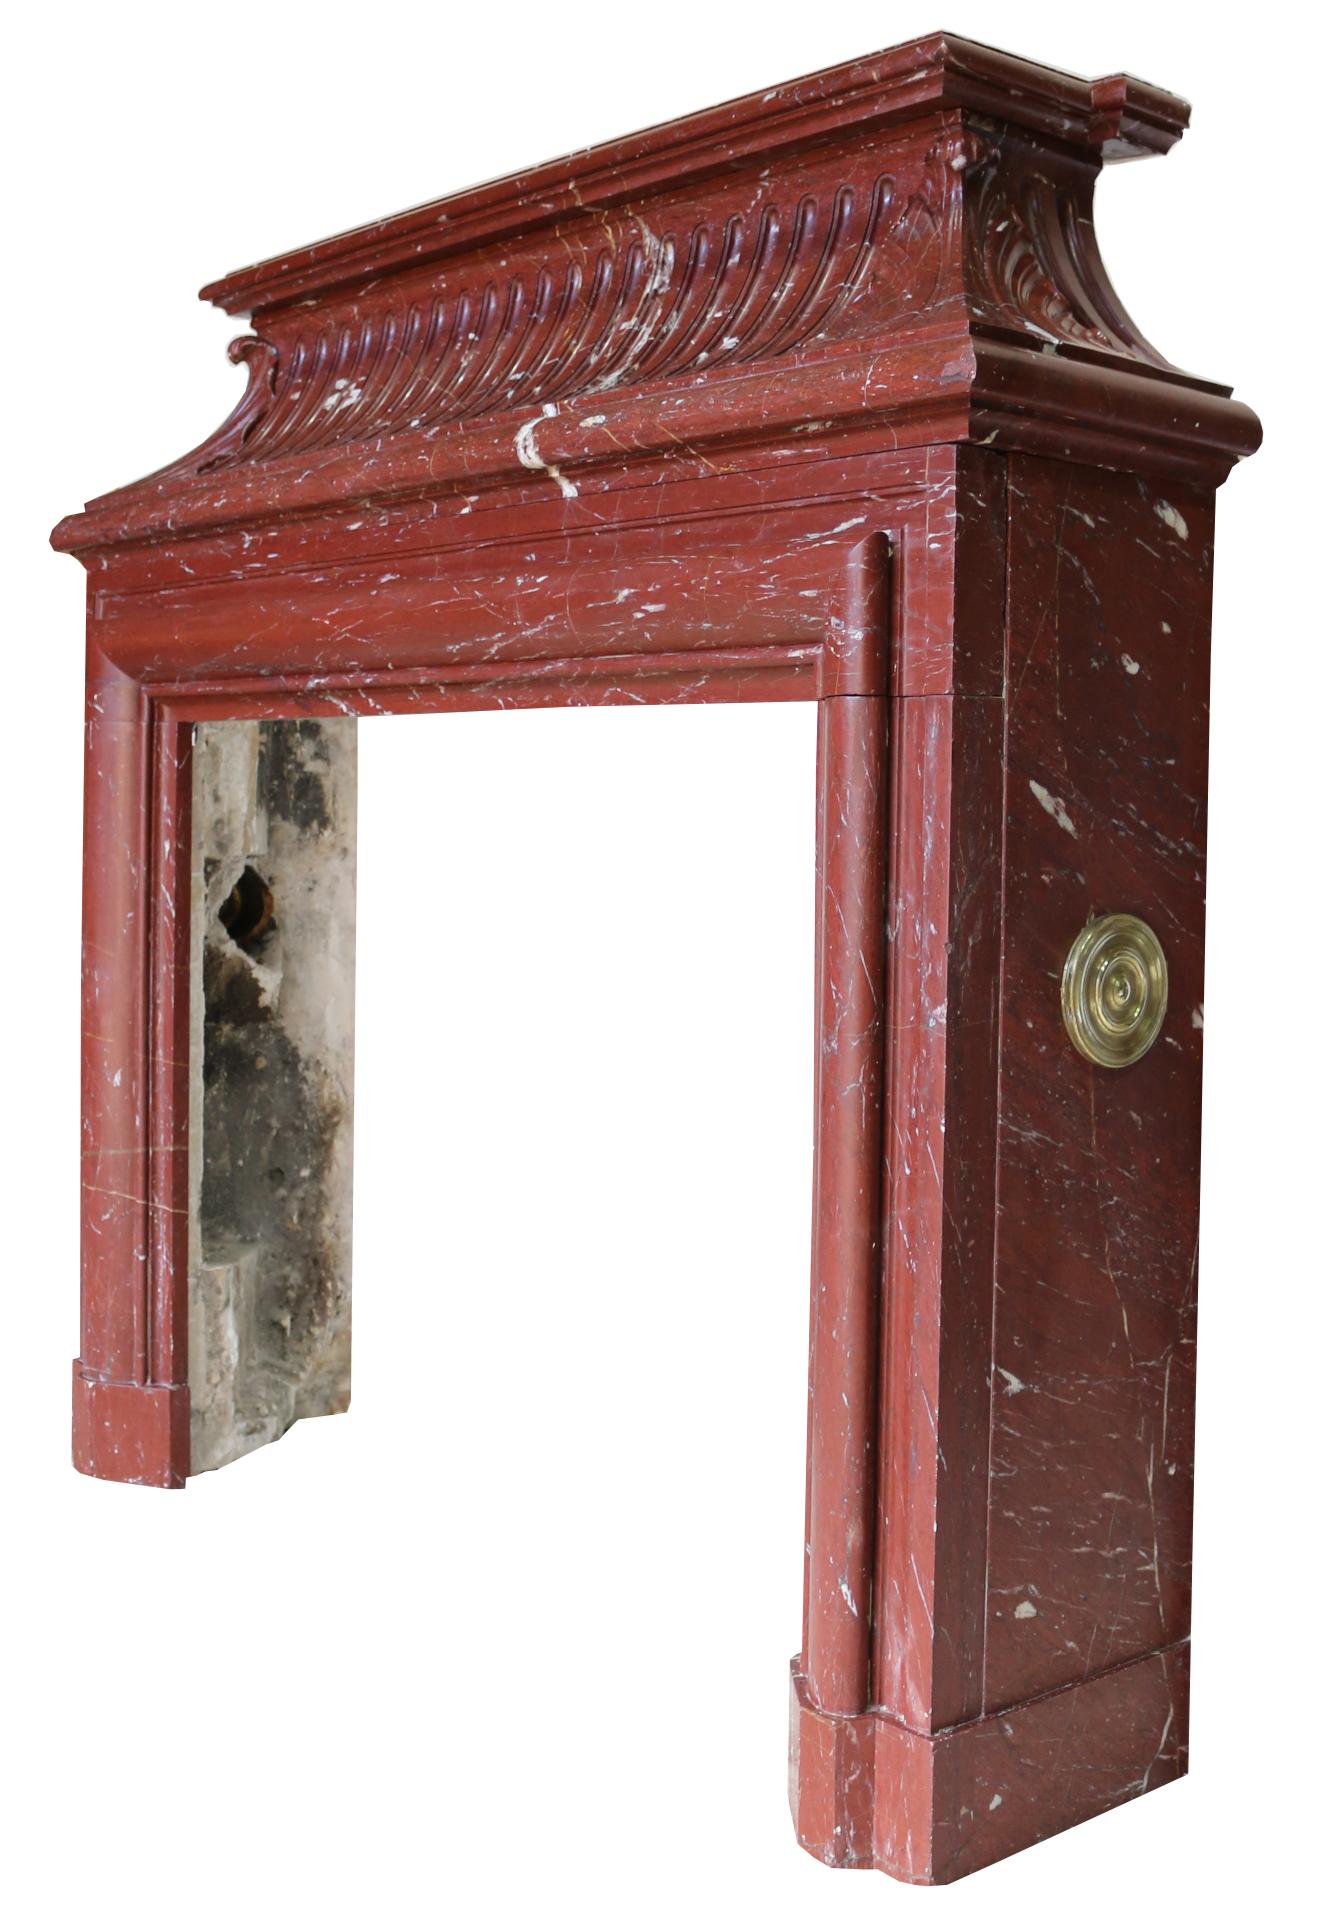 Antique ‘Bolection De Versailles’ Fire Mantel In Good Condition For Sale In Wormelow, Herefordshire